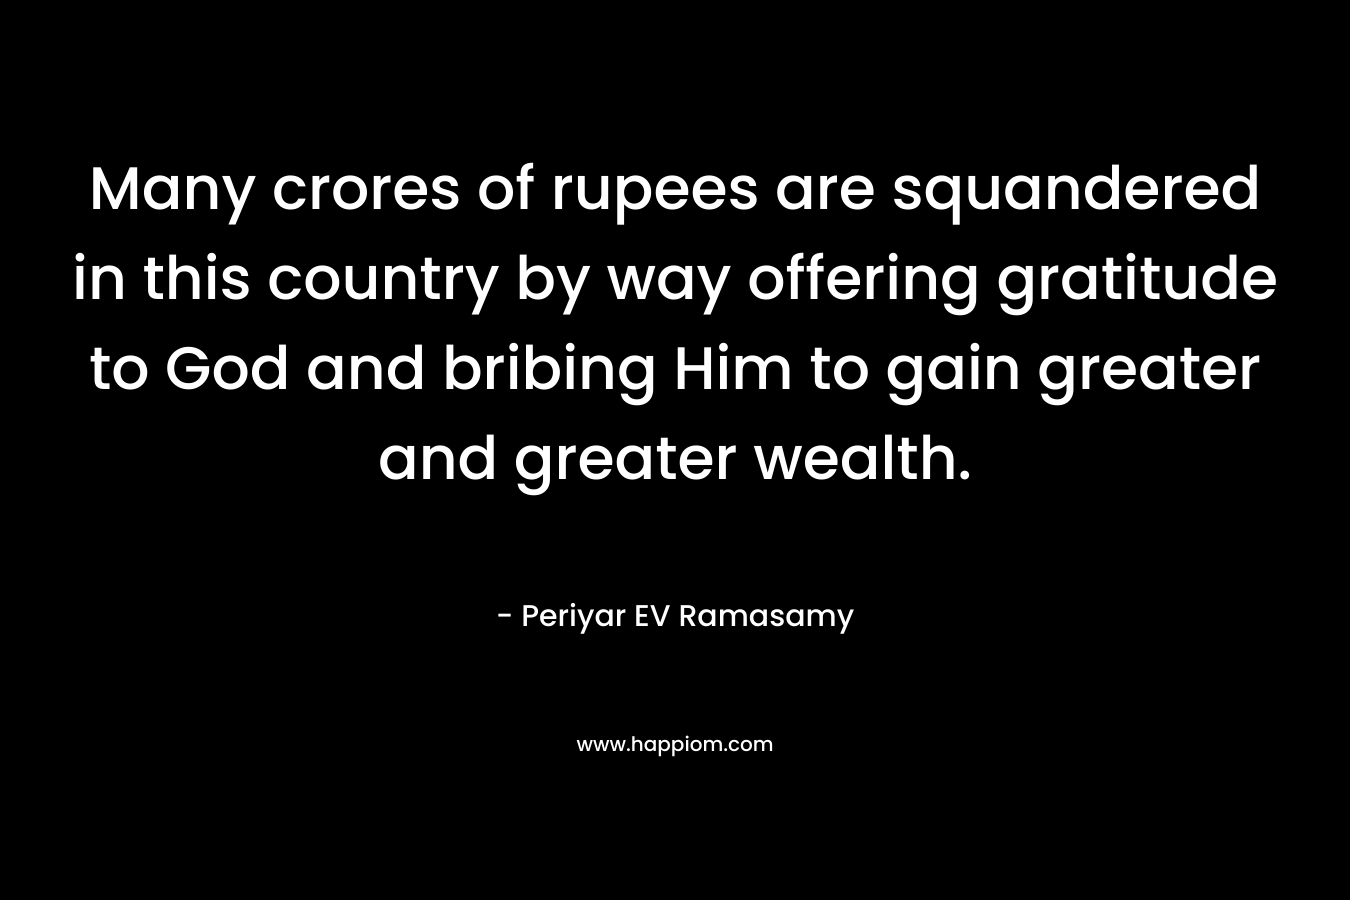 Many crores of rupees are squandered in this country by way offering gratitude to God and bribing Him to gain greater and greater wealth. – Periyar EV Ramasamy